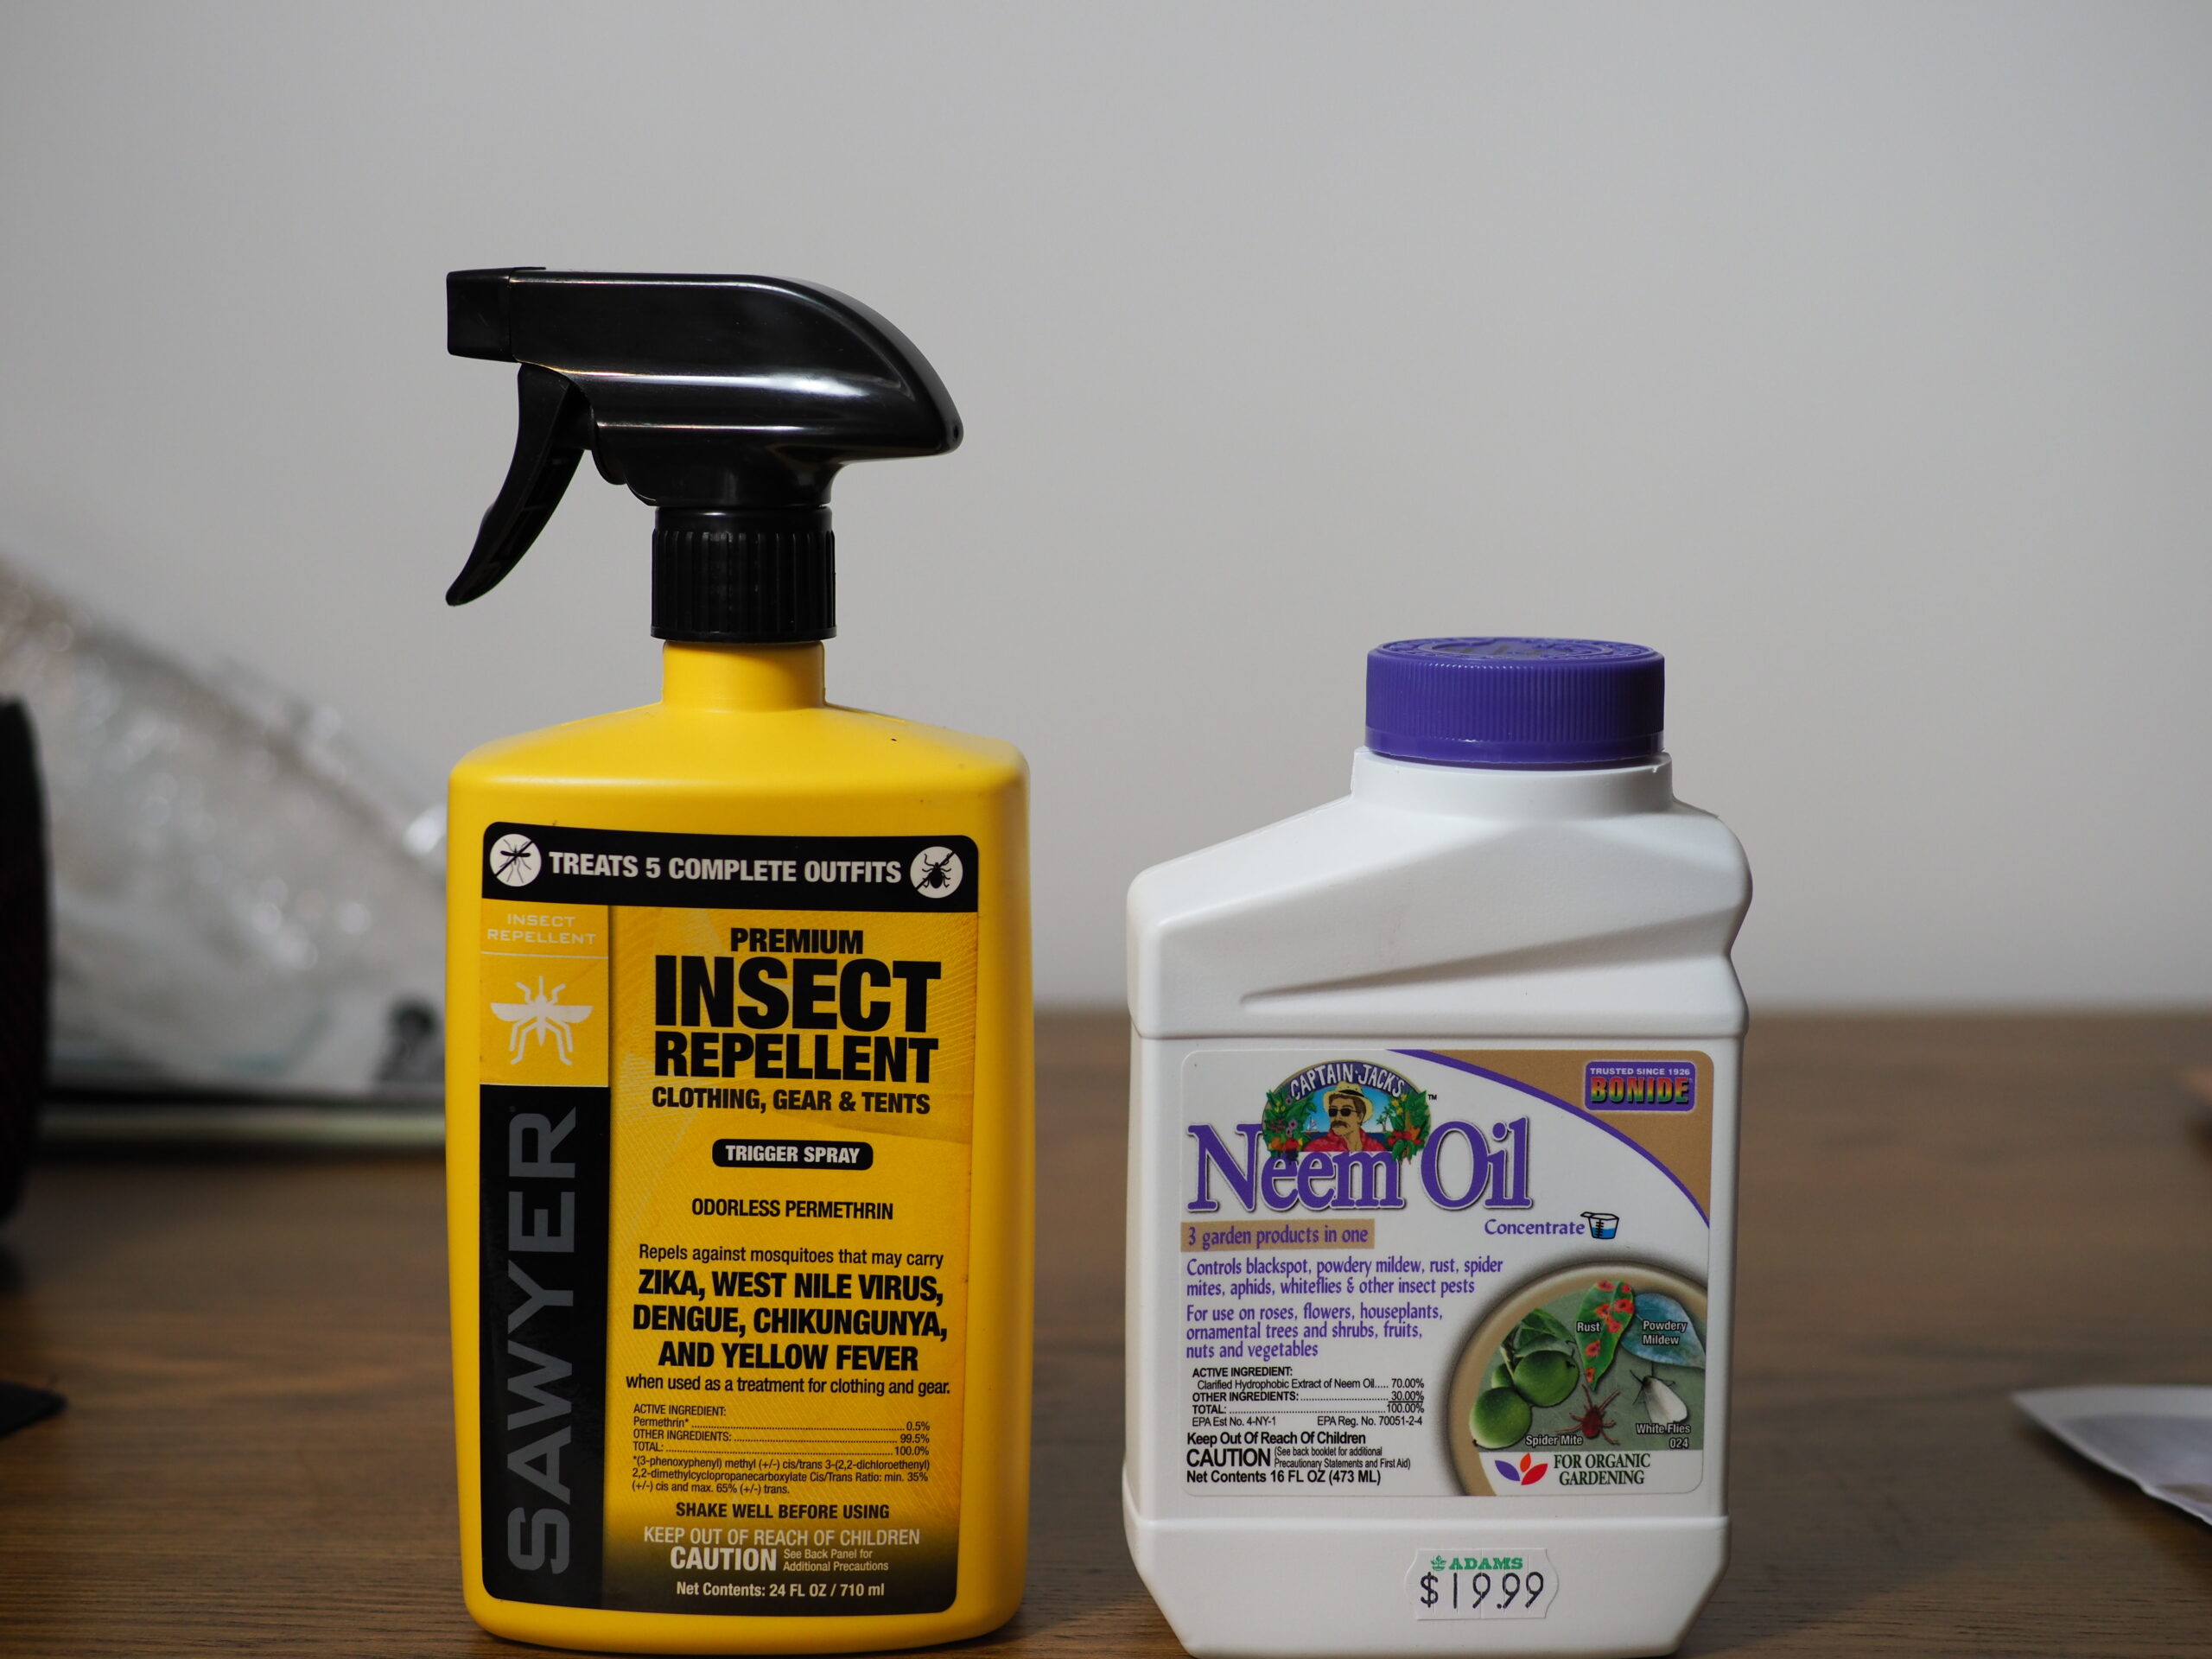 Sawyer permethrin on the left is one of the best tick repellents. Sprayed on clothing, it remains effective for several weeks even after washing clothes. Never apply it directly to your skin. On the right is one brand of neem oil. While an interesting organic insecticide, its important to learn how to use it and how it works.